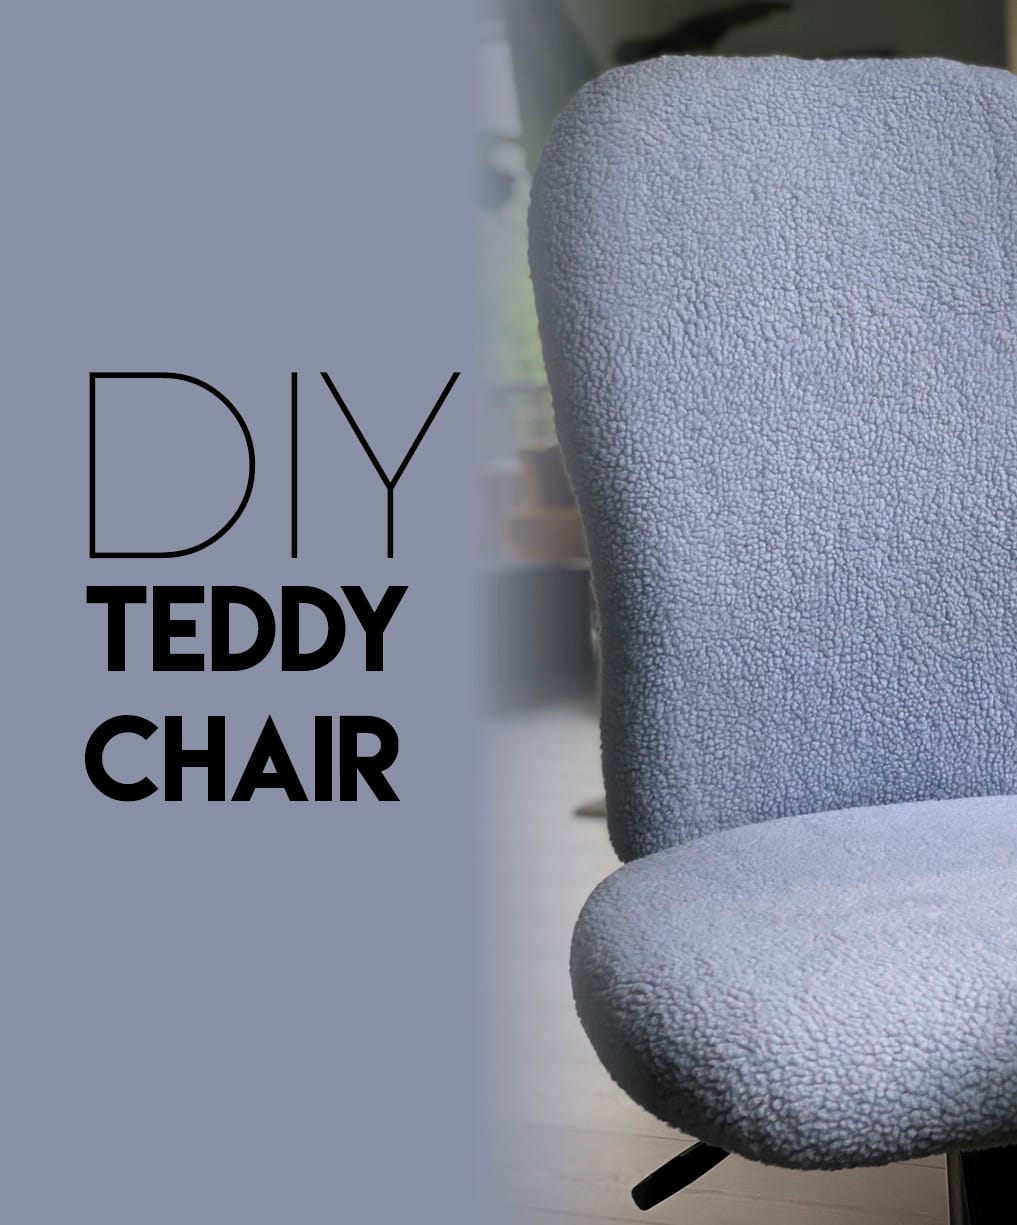 From trash to treasure - Teddy chair